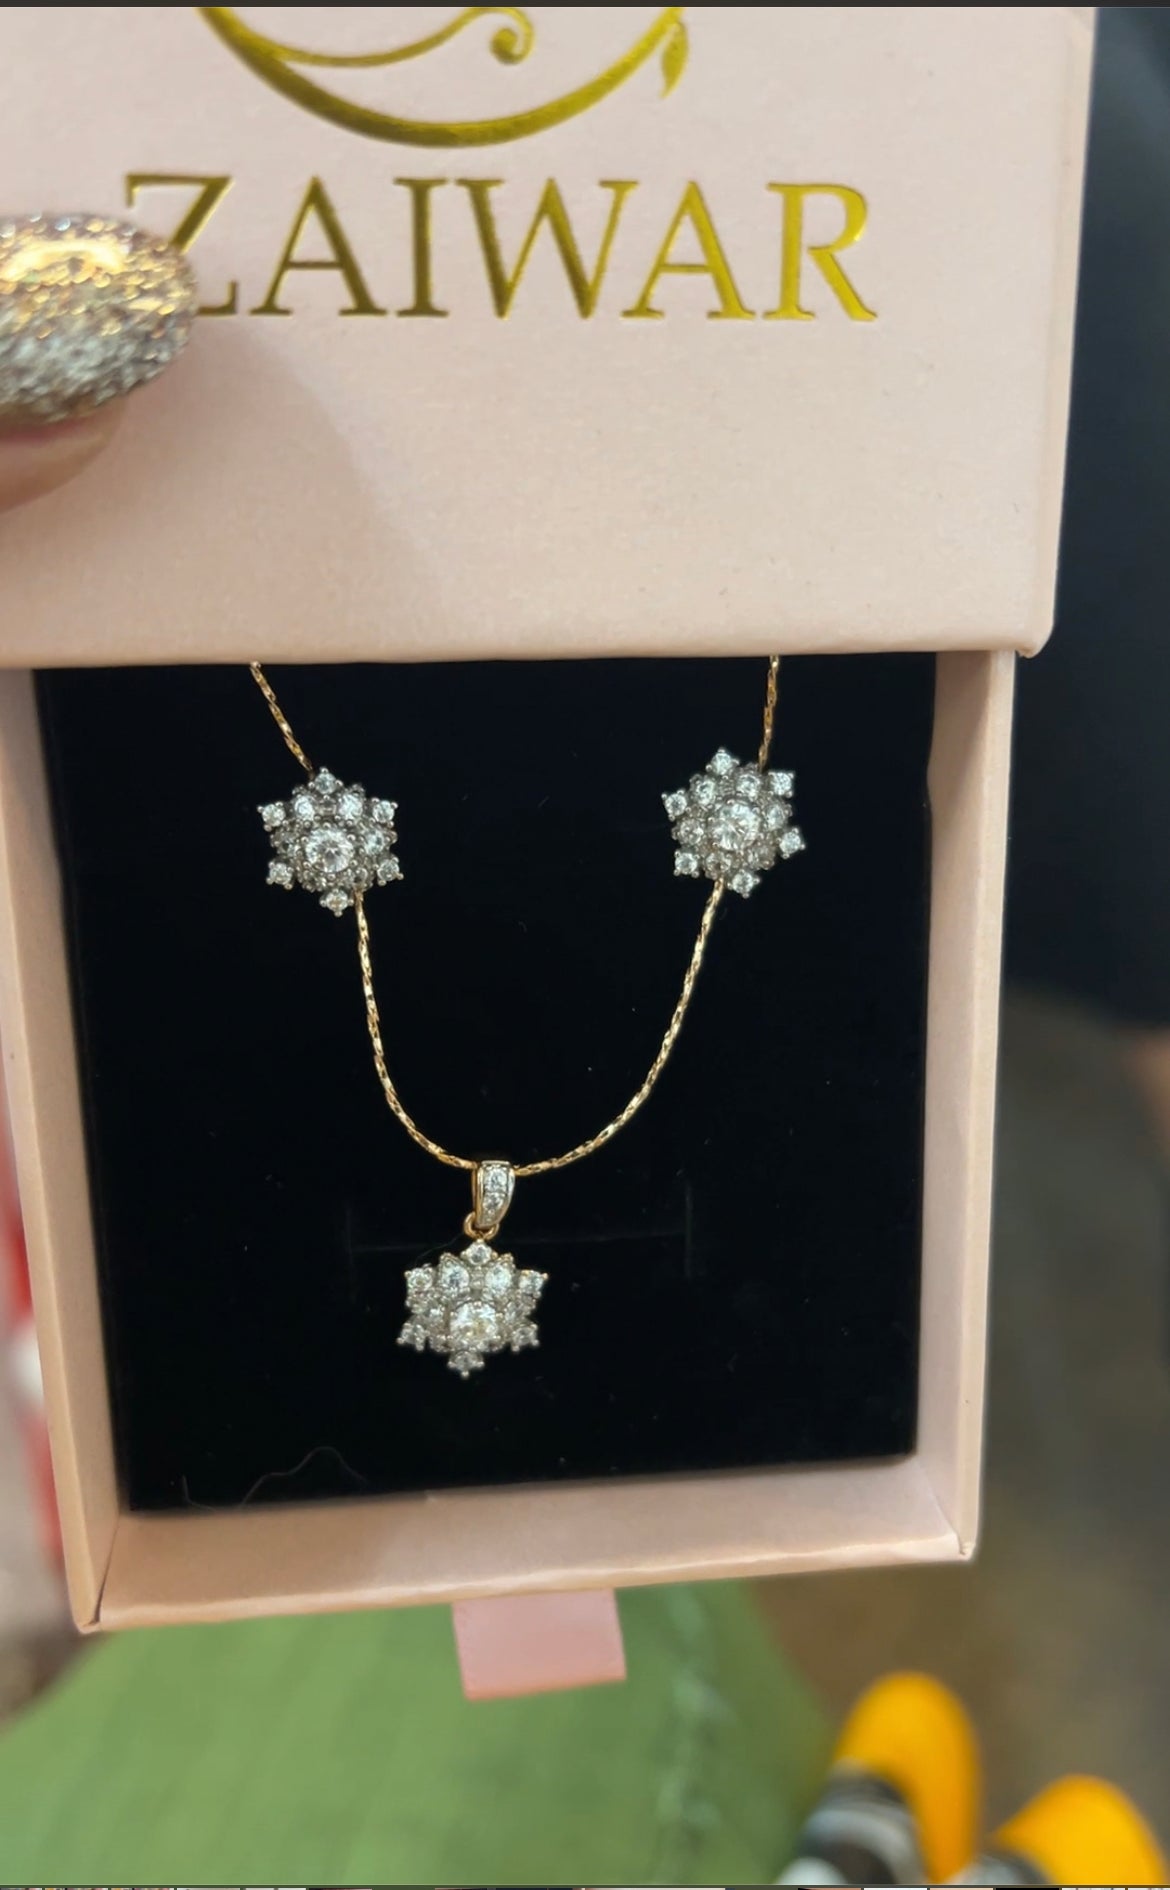 where to buy cute earrings canada
Star shaped studs earrings and star necklace set 